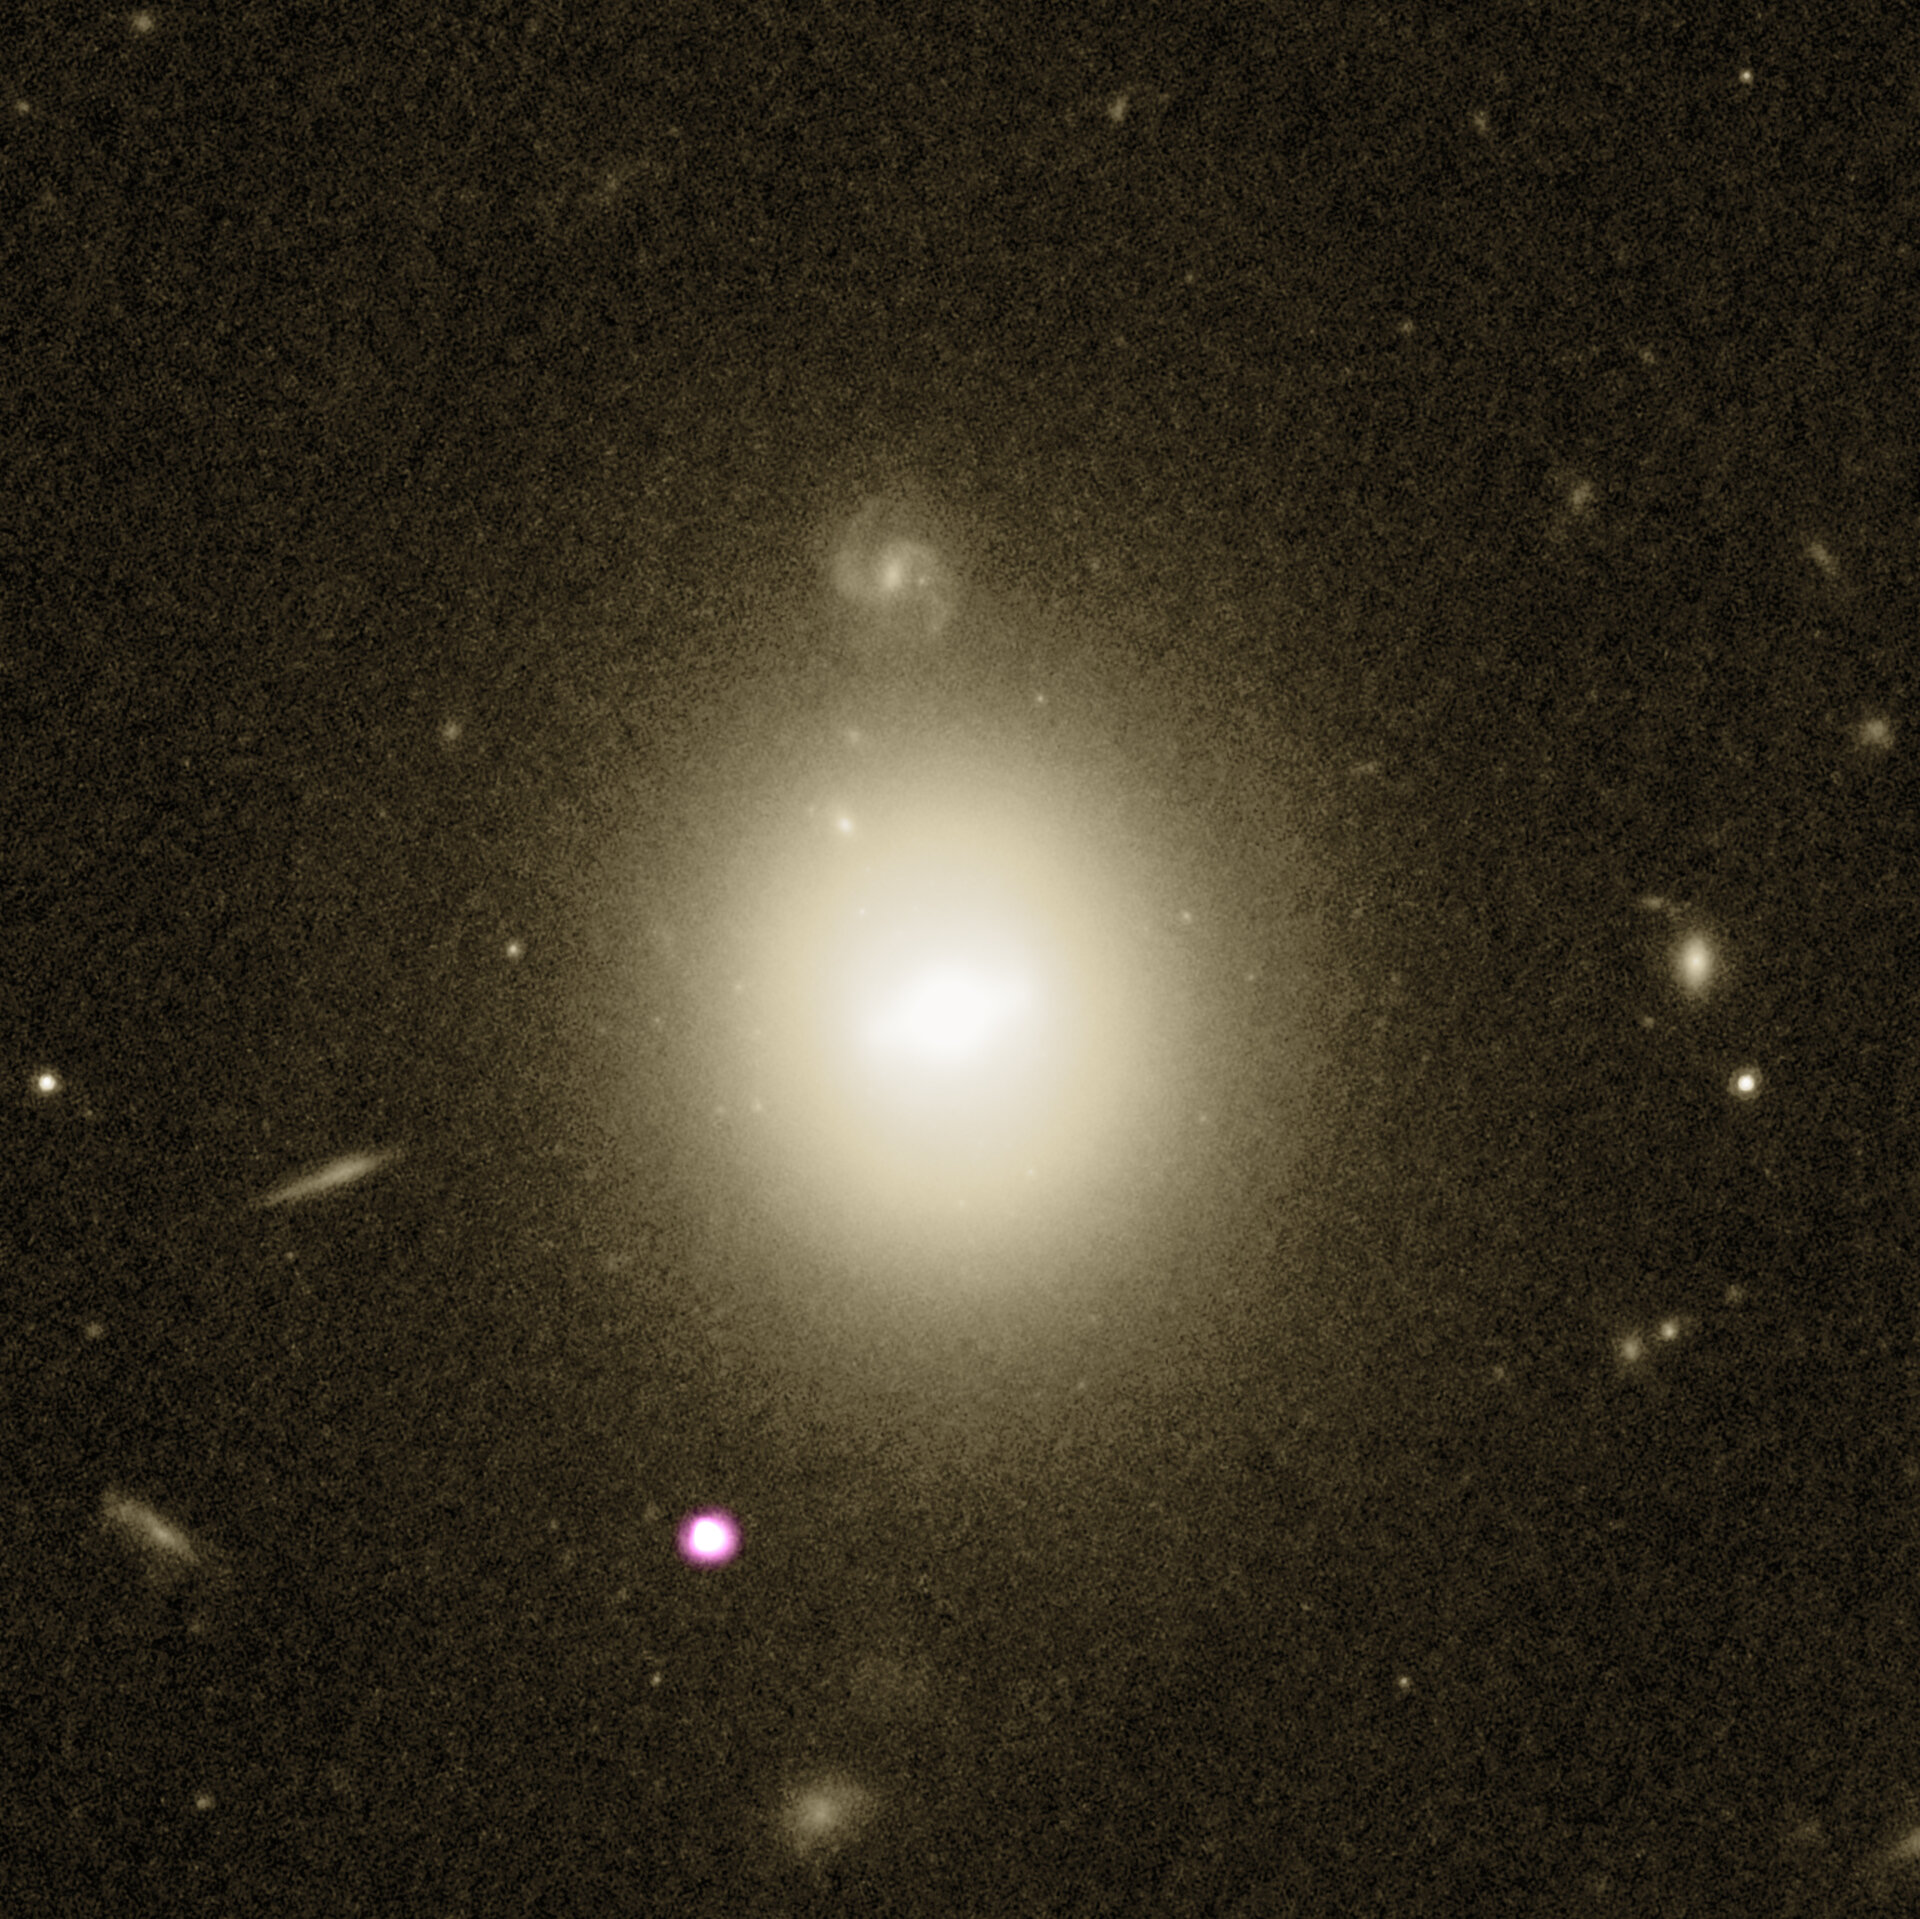 Black hole candidate and host galaxy